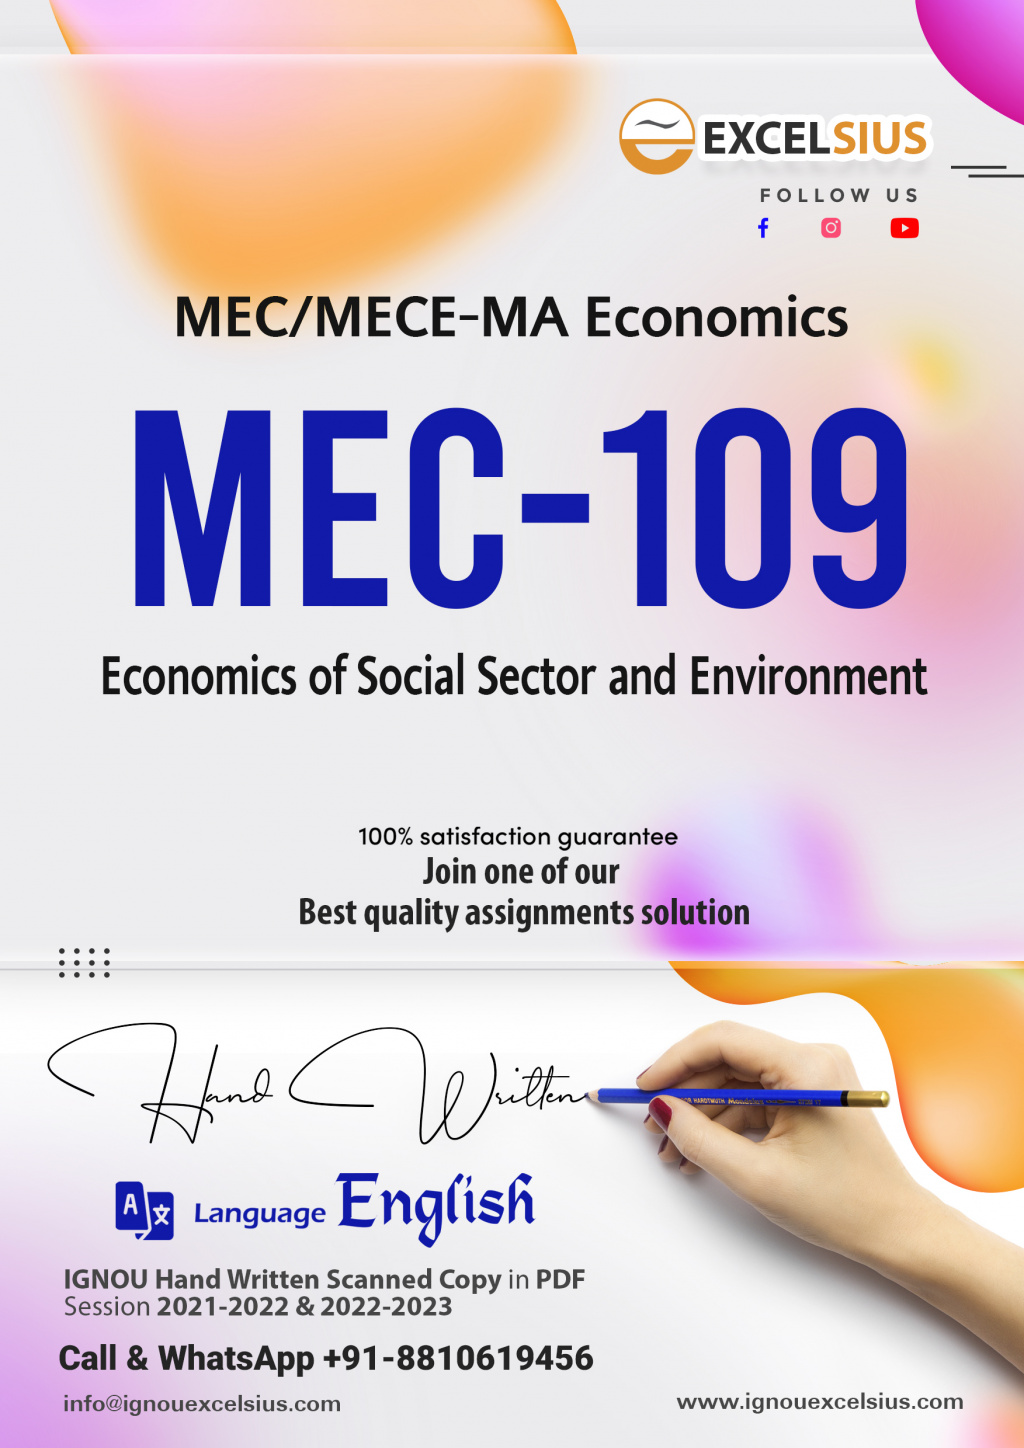 IGNOU MEC-109 - Economics of Social Sector and Environment Latest Solved Assignment-July 2022 – January 2023